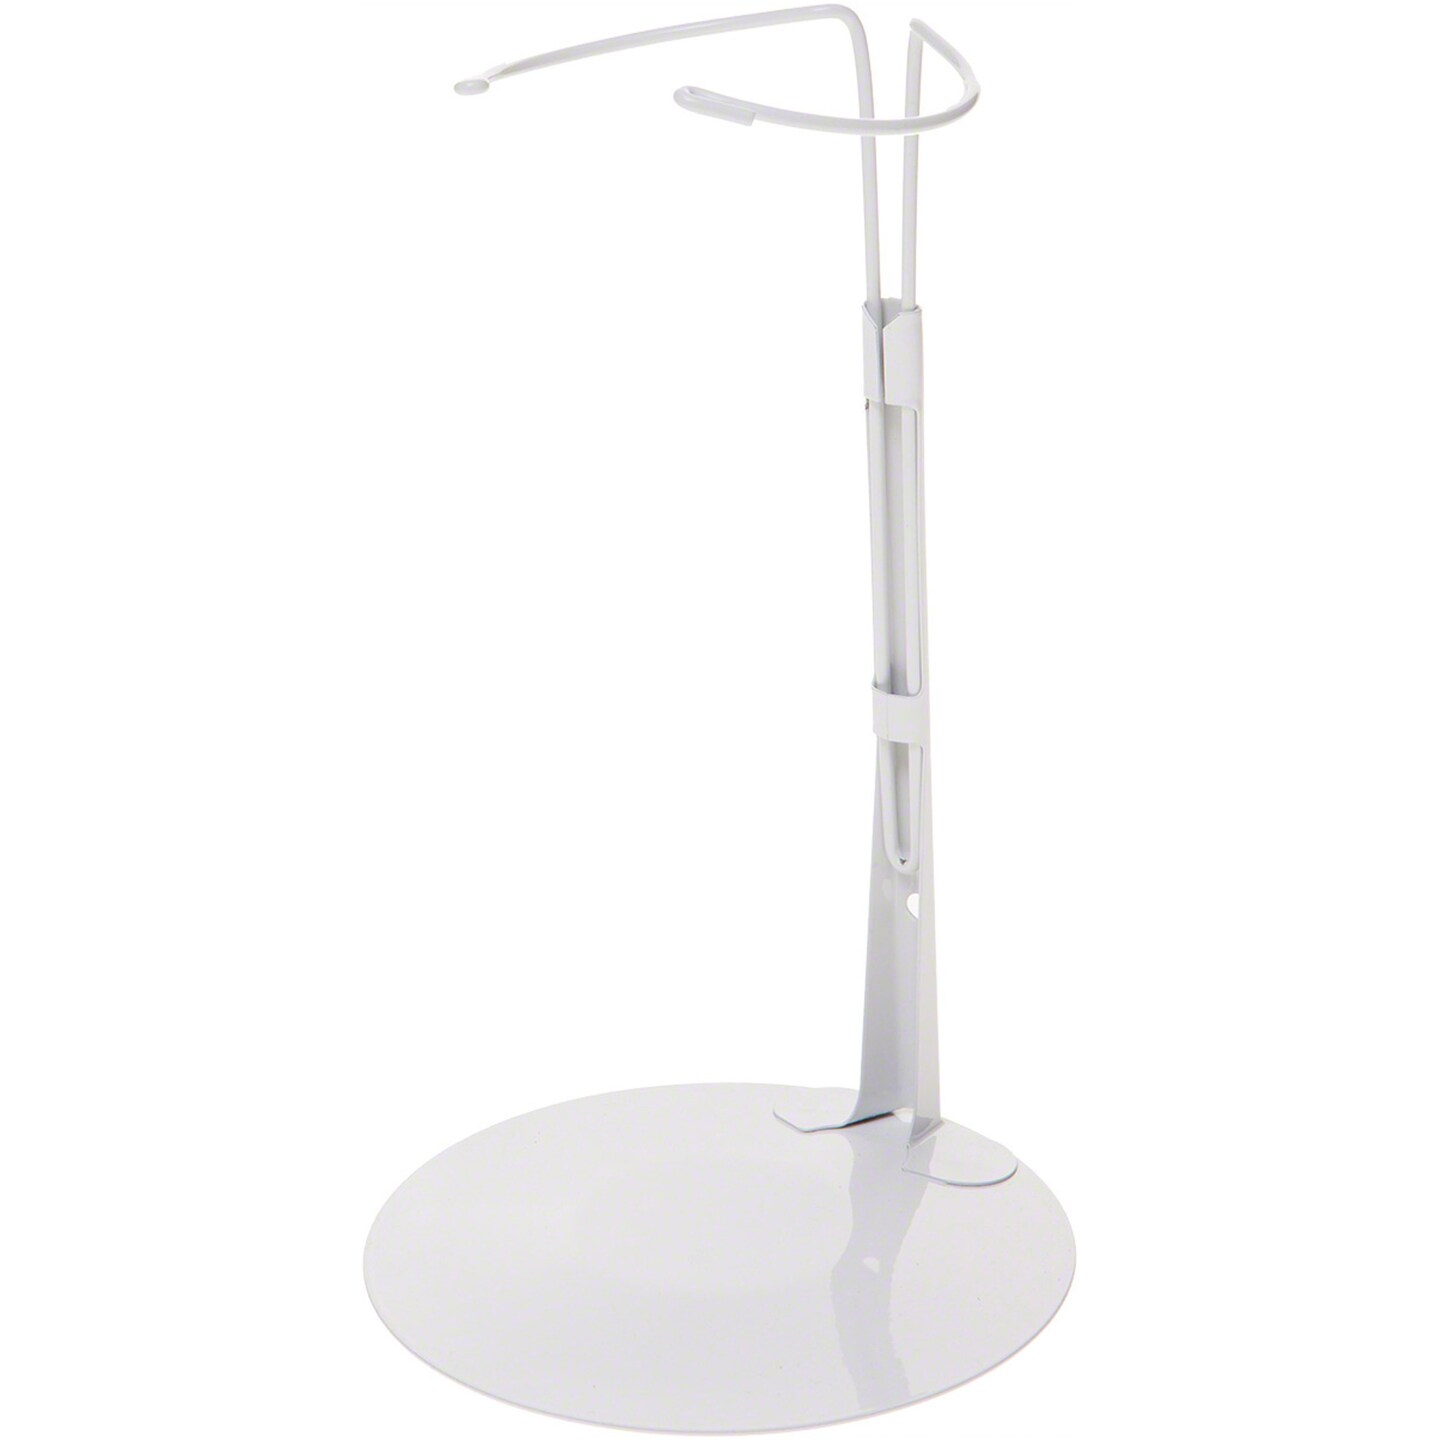 Kaiser 3101 White Adjustable Doll Stand, fits 15 to 20 inch Dolls, waist width adjusts from 3.75 to 4 inches